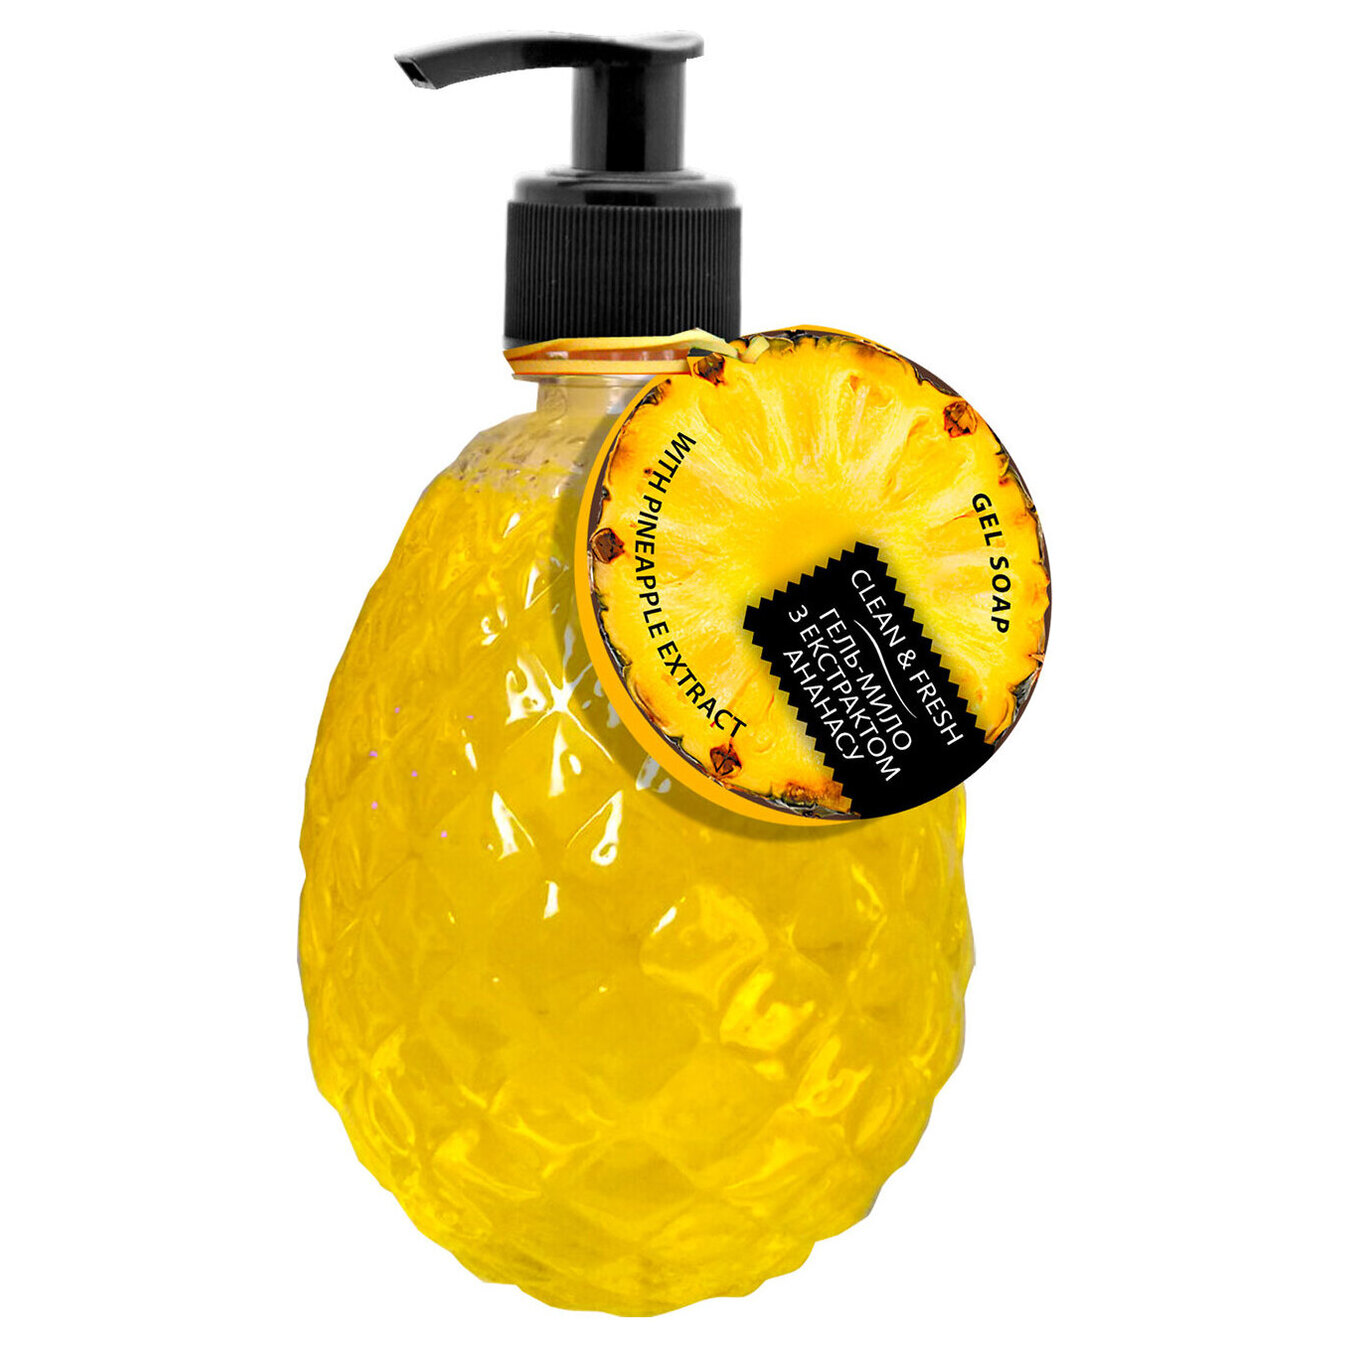 Gel-soap Delicious secrets with pineapple extract 500ml